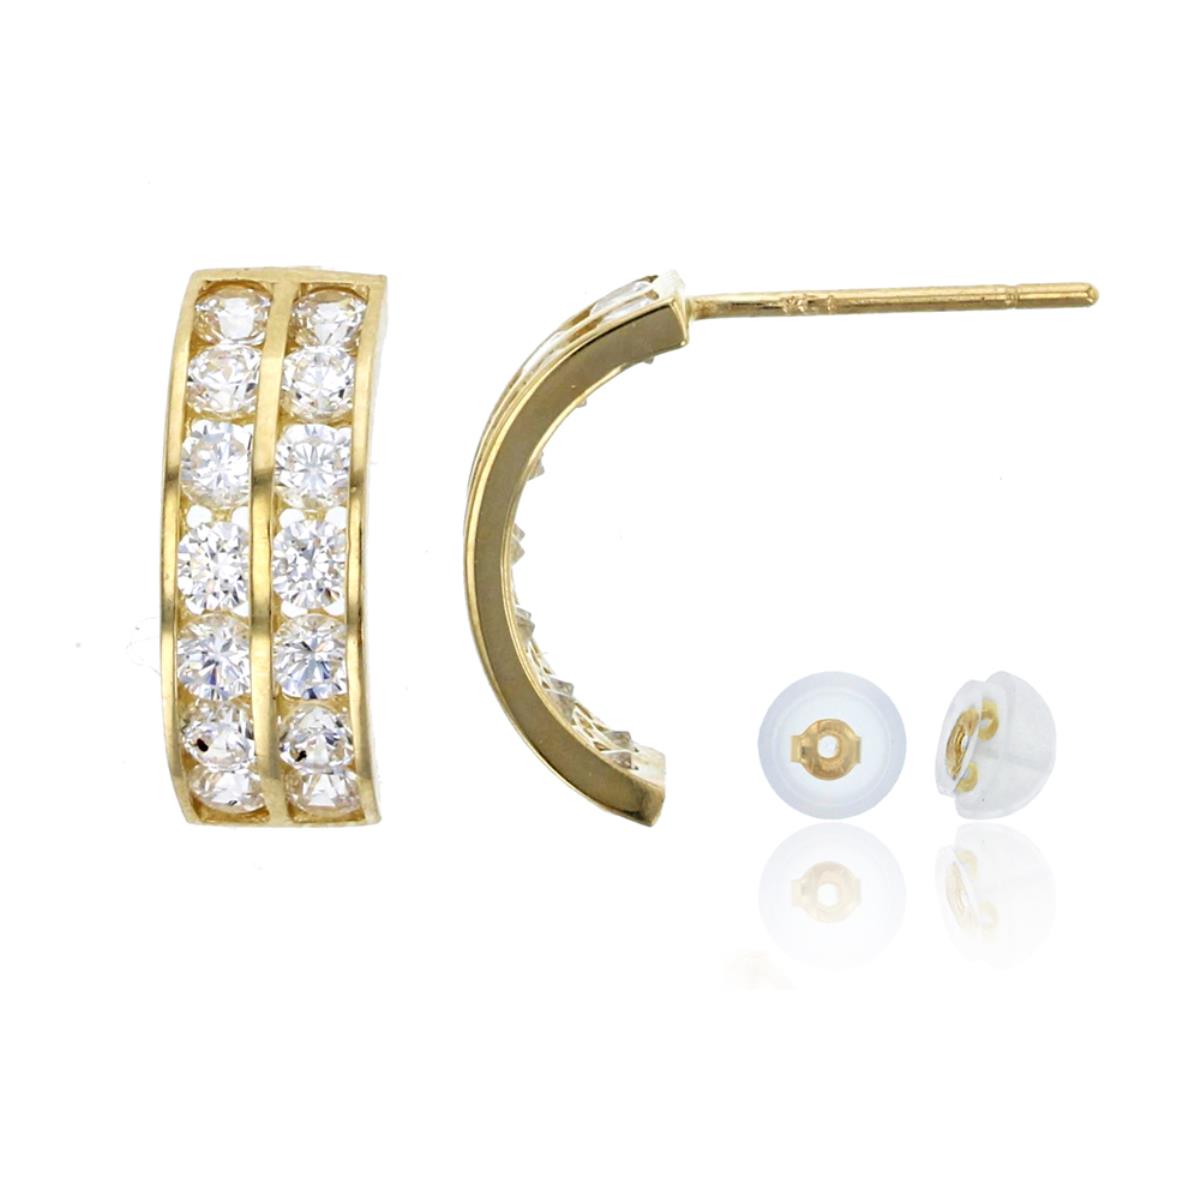 10K Yellow Gold 2mm Round Cut Channel Half Hoop Earring & 10K Silicone Back